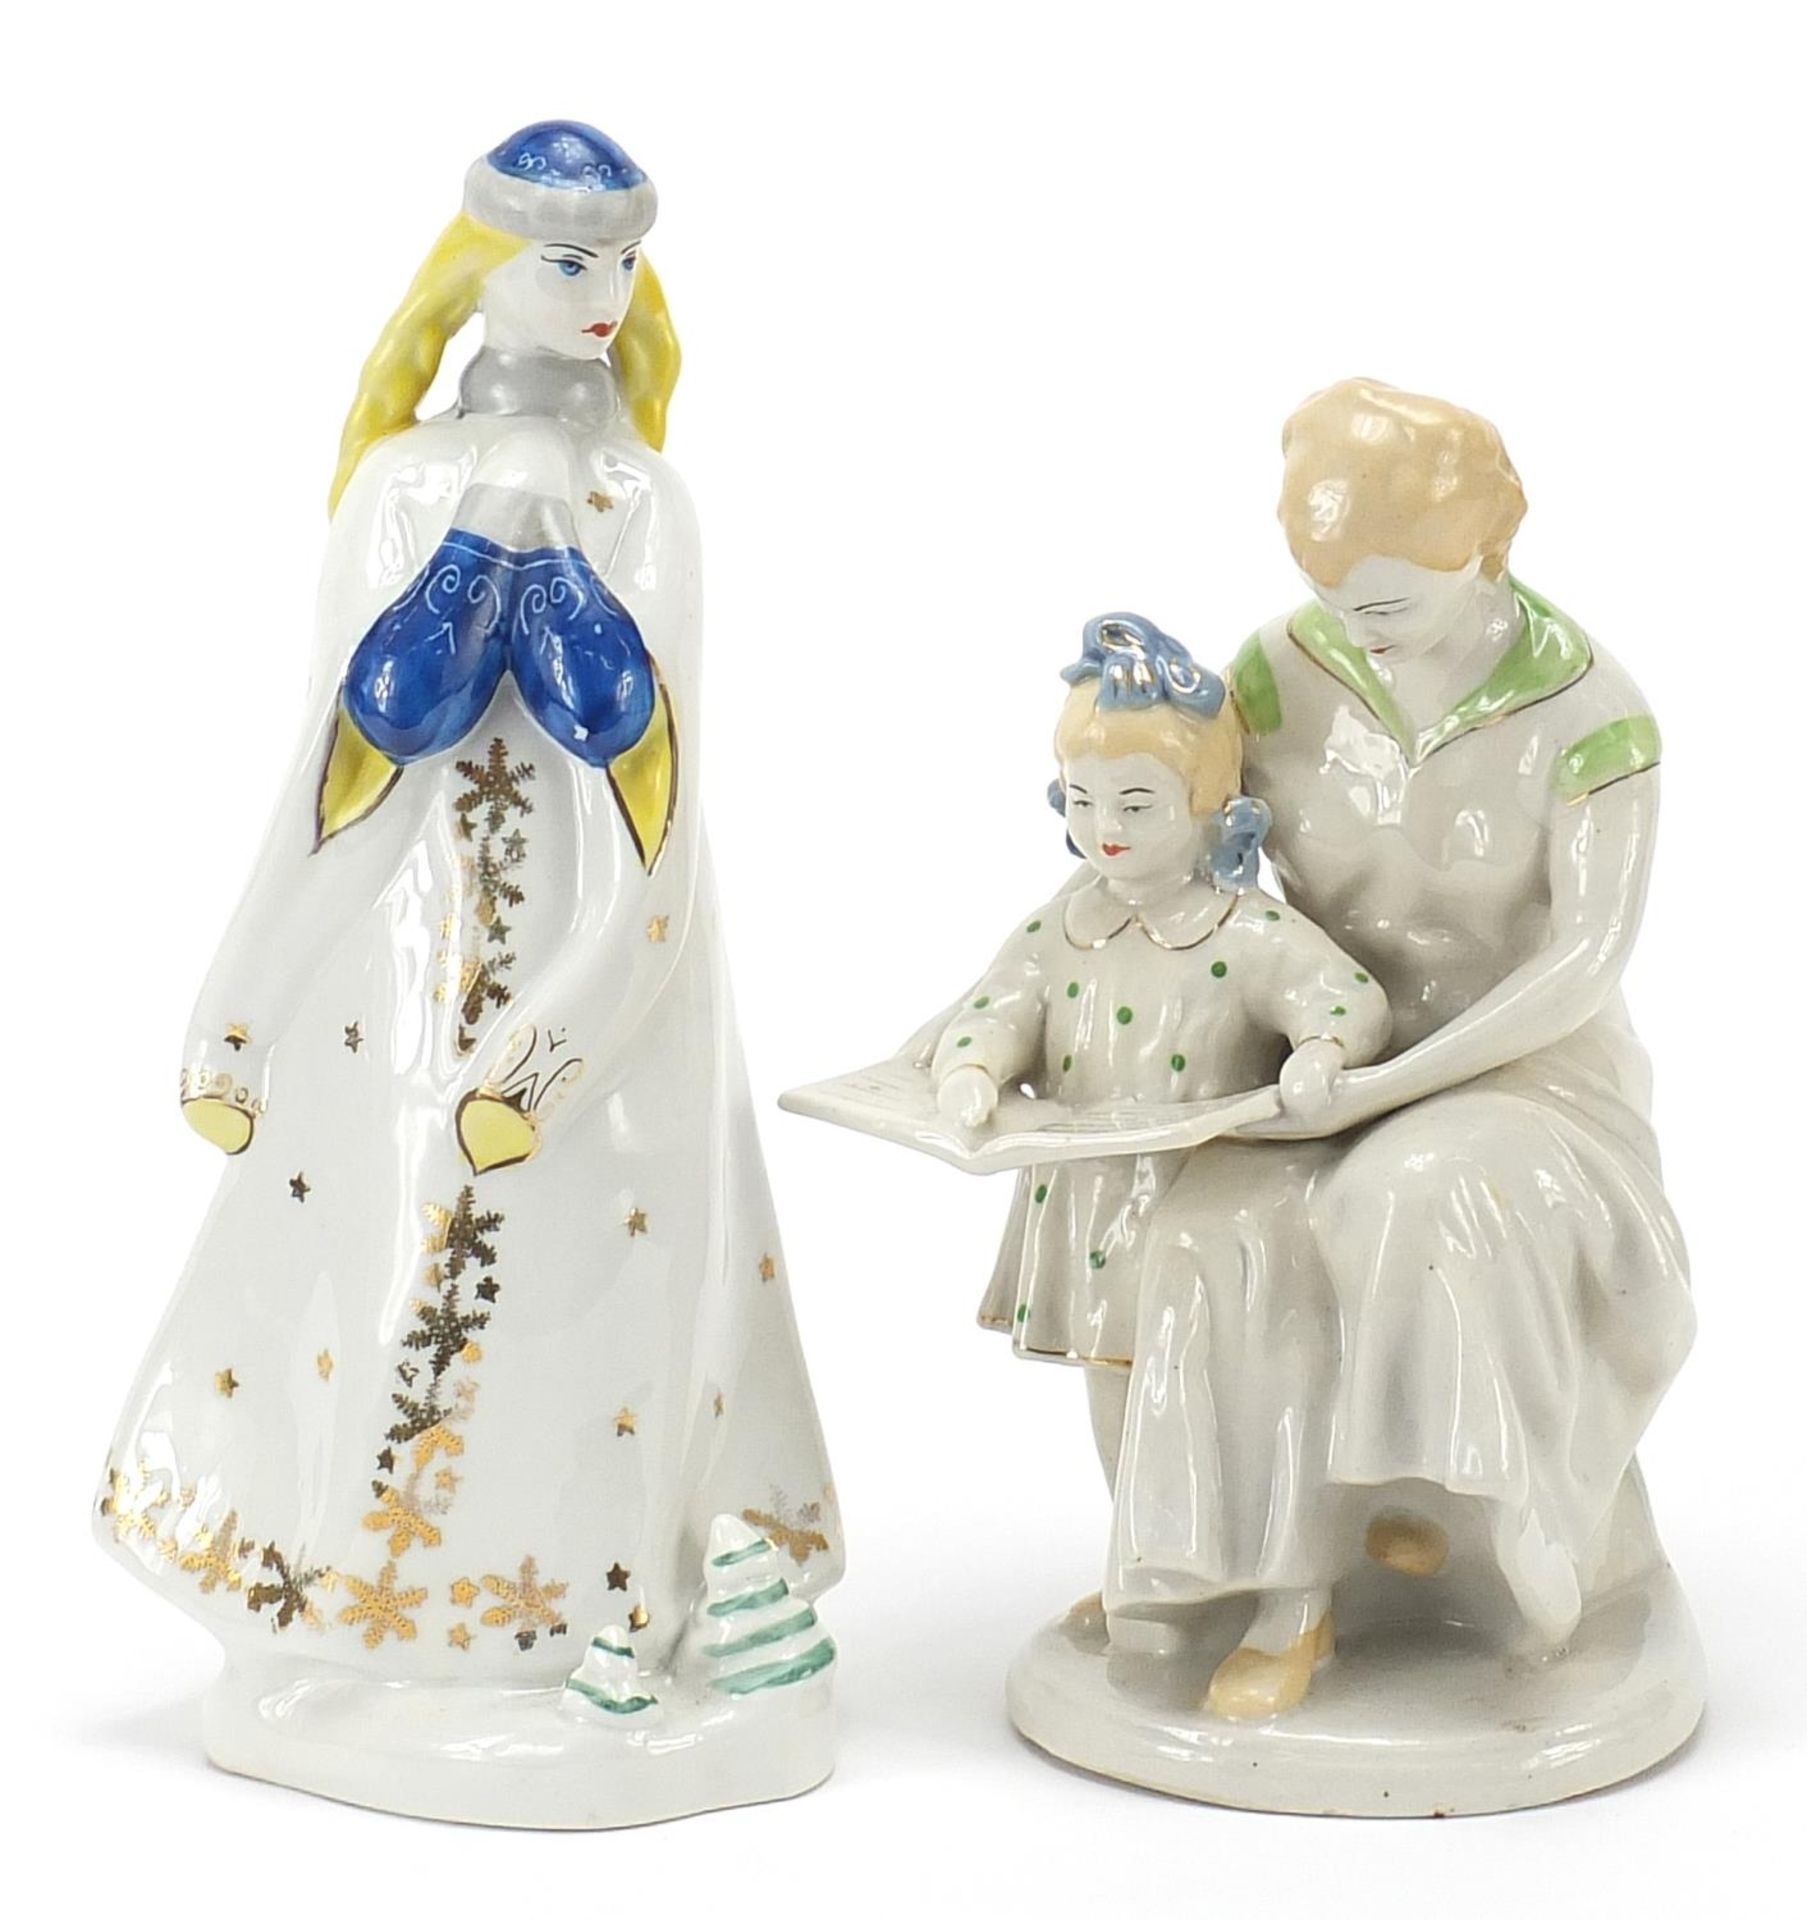 Two Russian porcelain figurines, the largest 28cm high